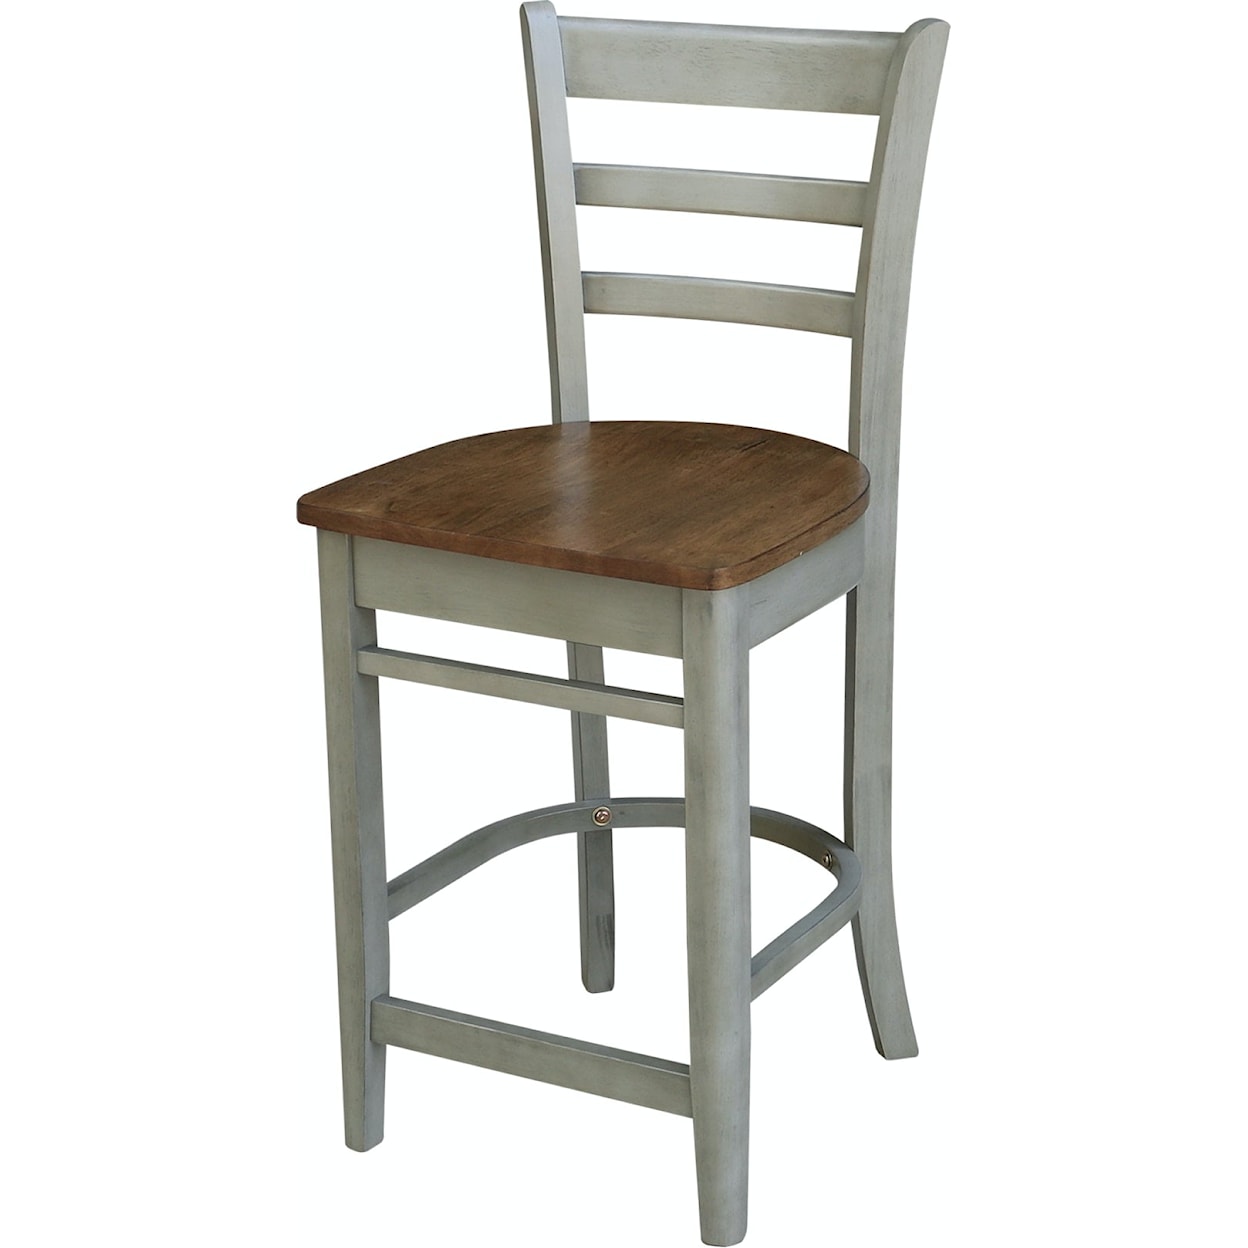 John Thomas Dining Essentials Emily Counter Chair in Hickory / Stone